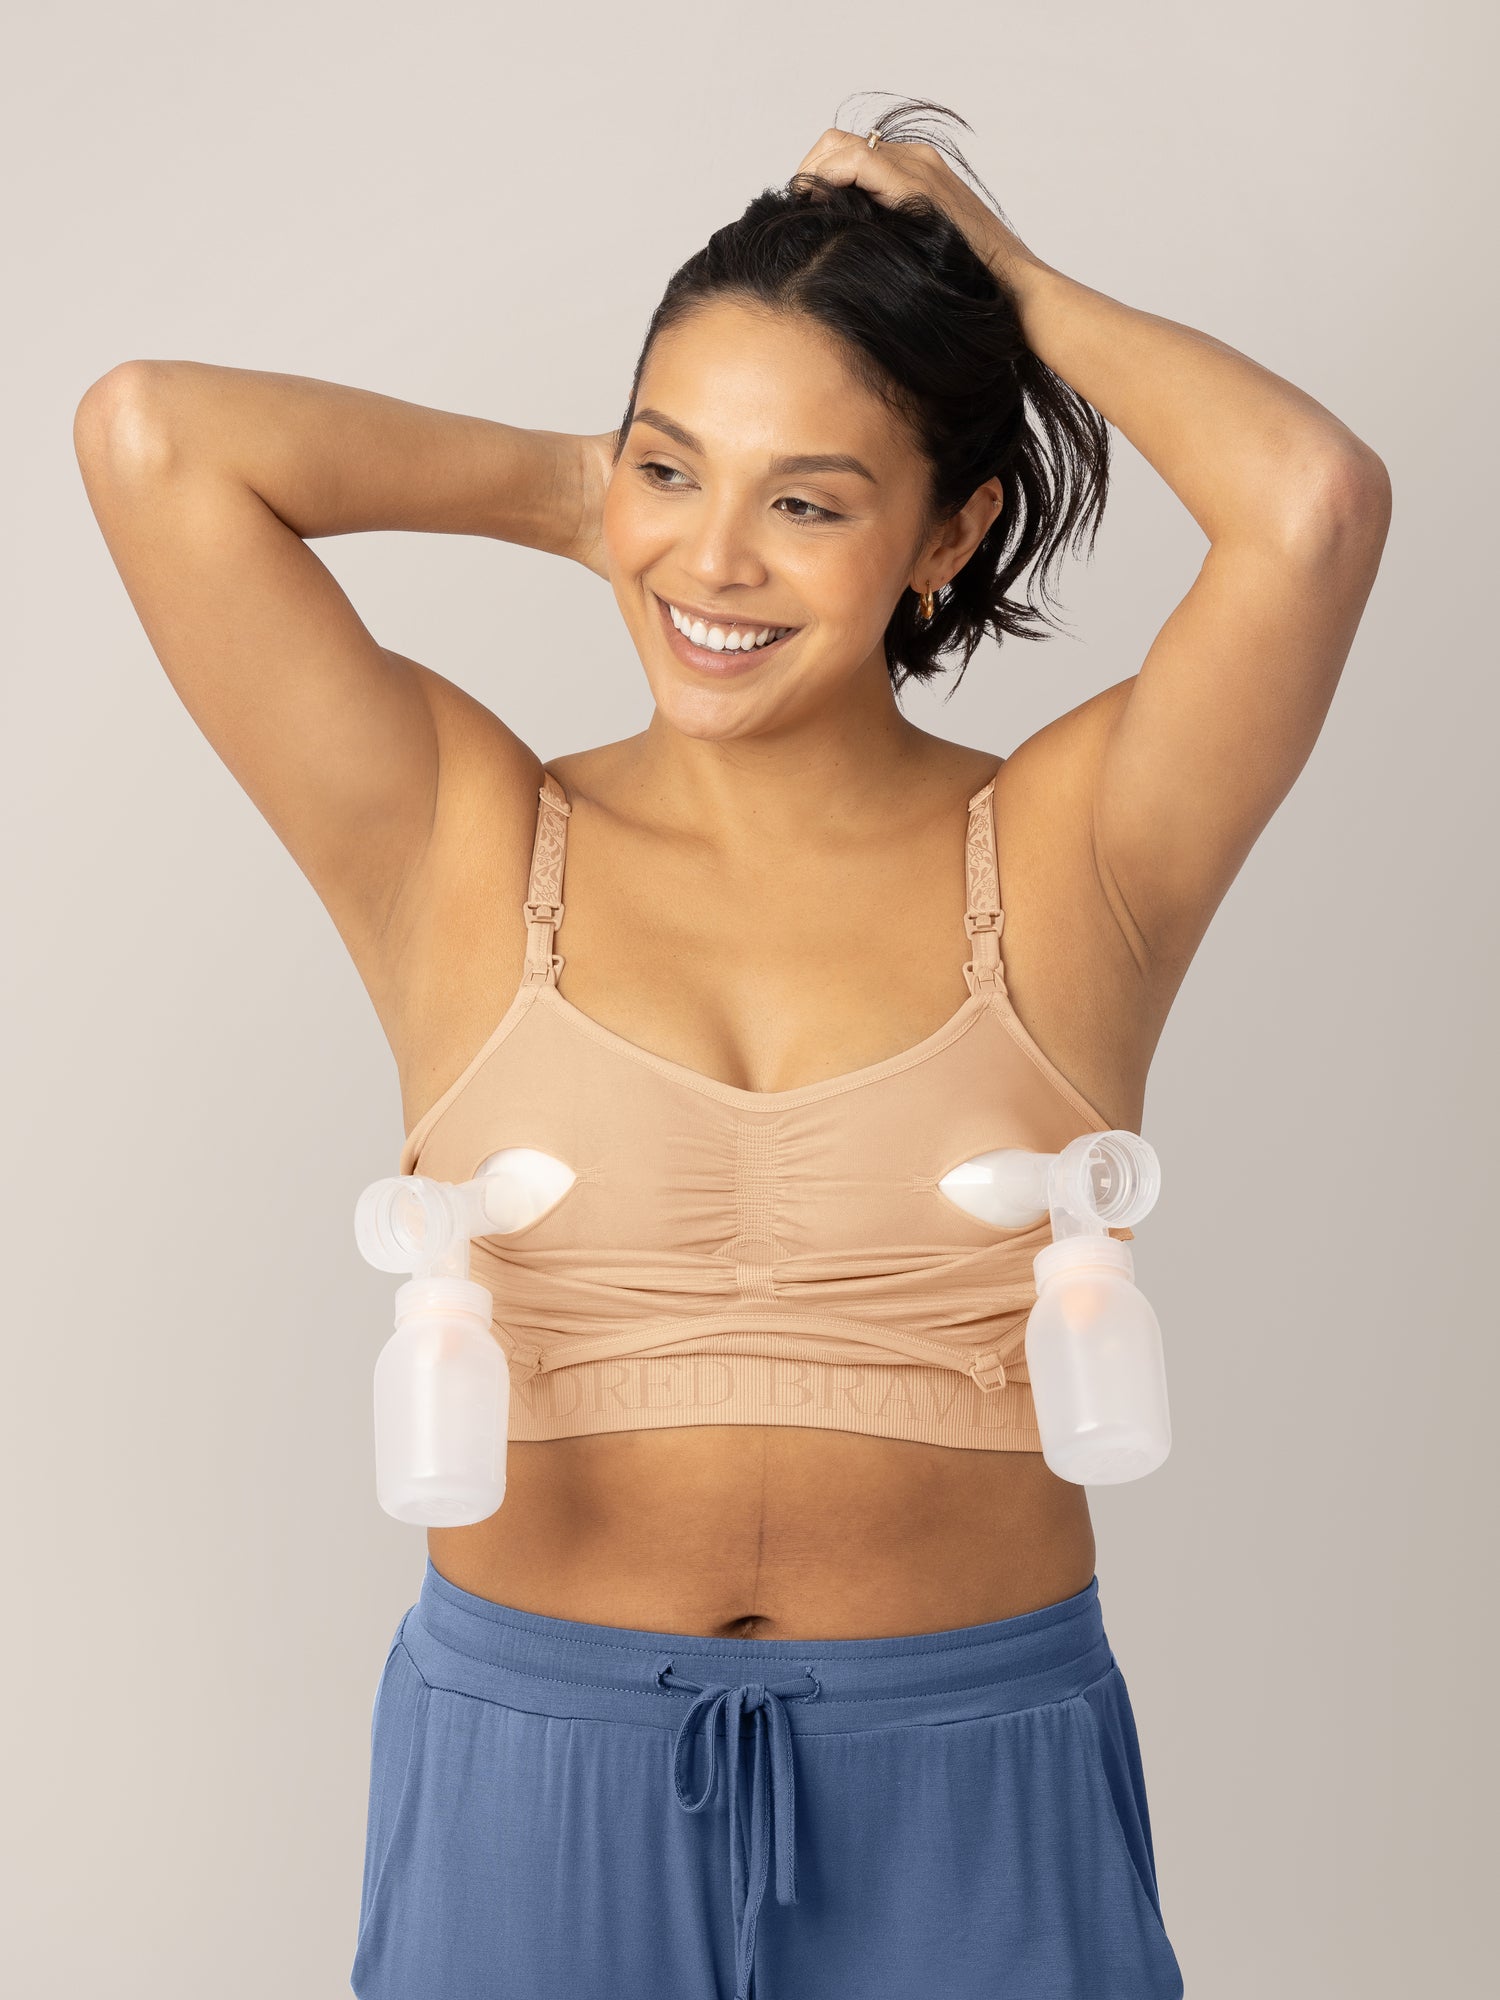 More of Me to Love Cotton & Bamboo Bra Liners 3-Pack: Black Beige